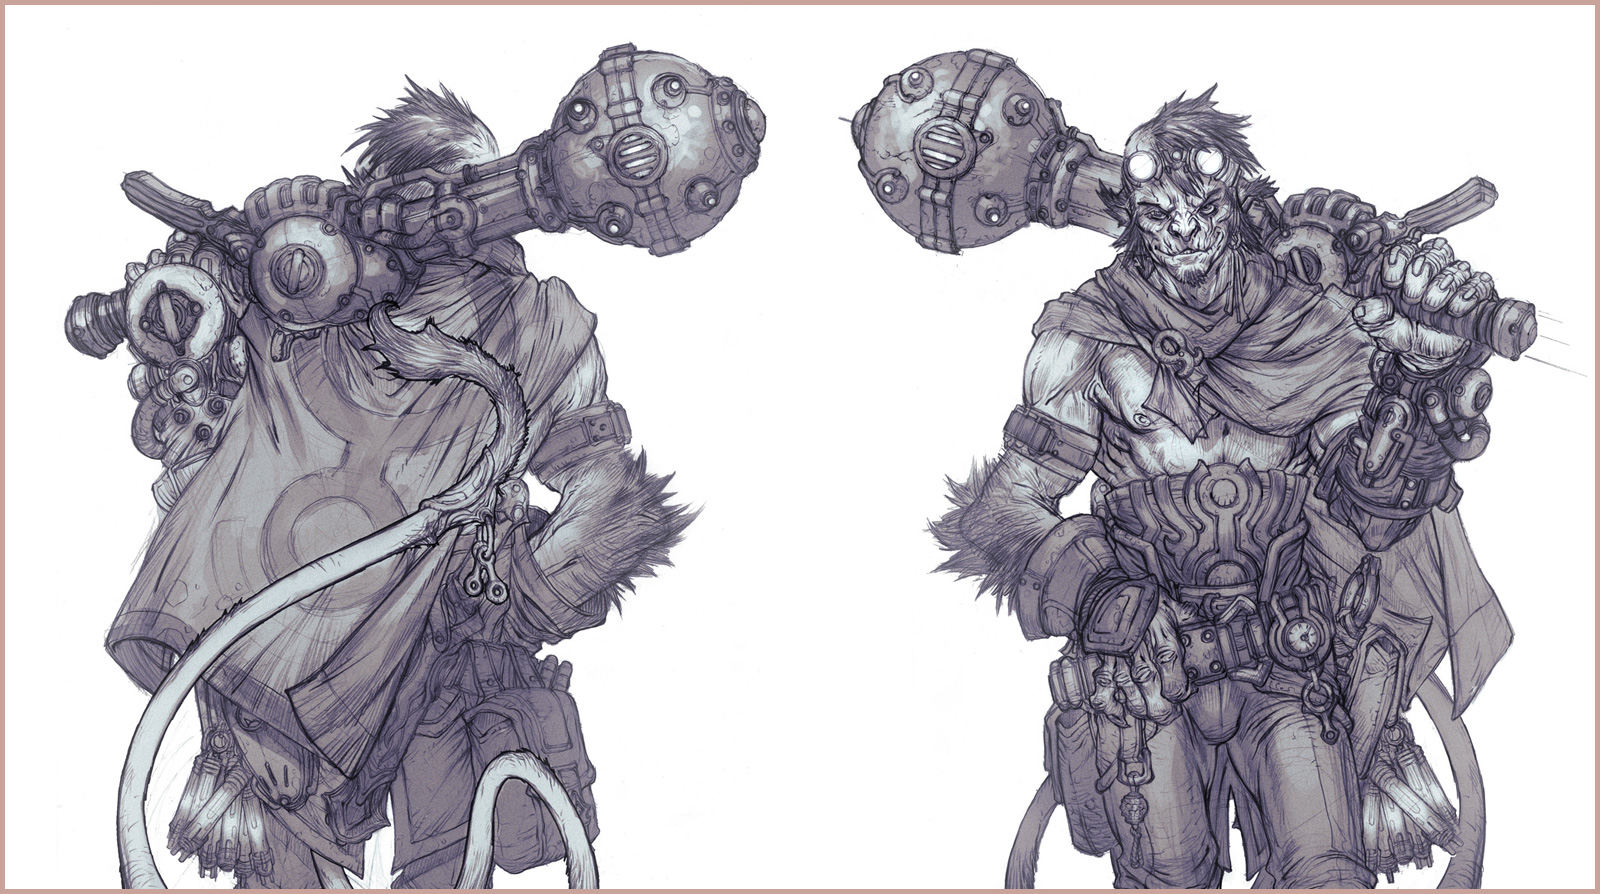 turnaround illustration of a monkey warrior with a mace